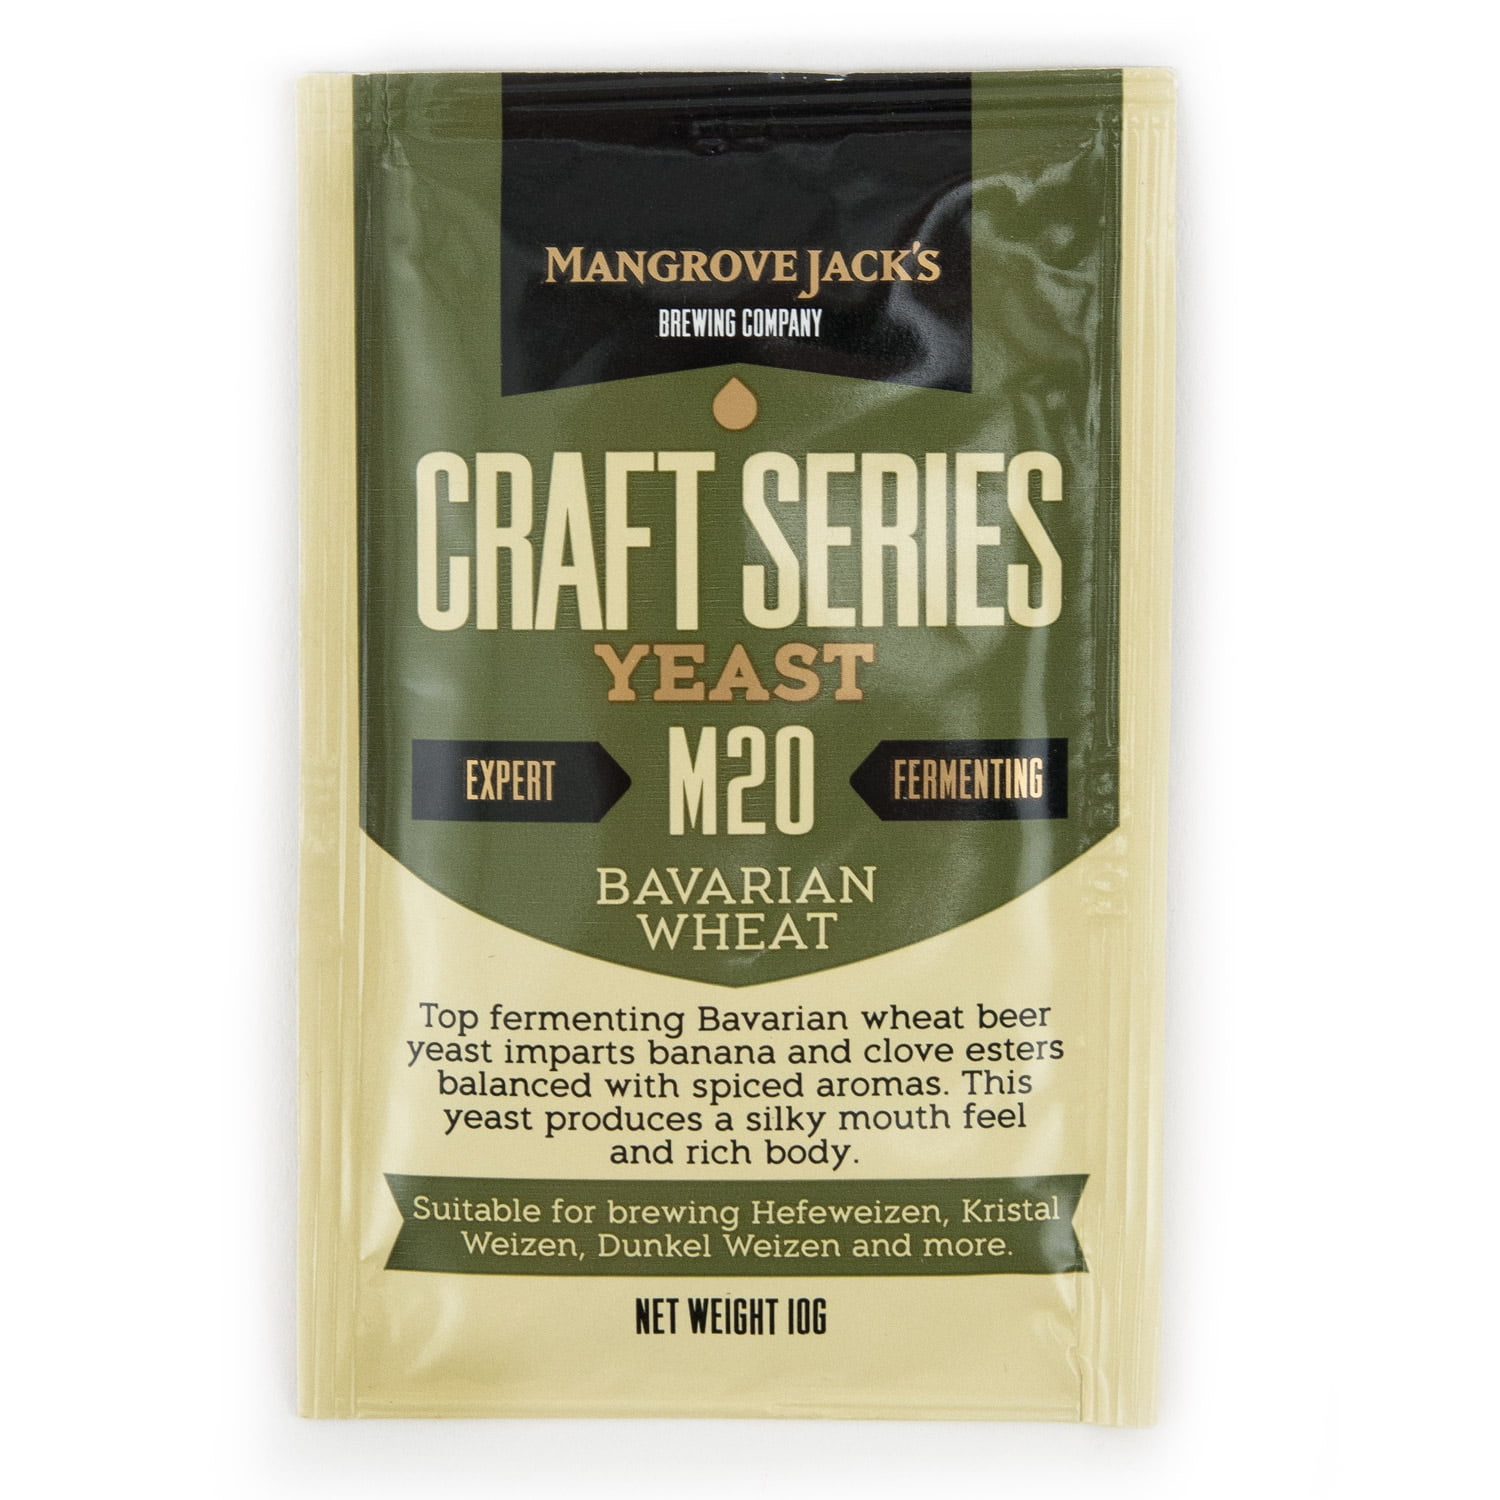 Mangrove Jack's Craft Series Bavarian Wheat Brewery Pouch 